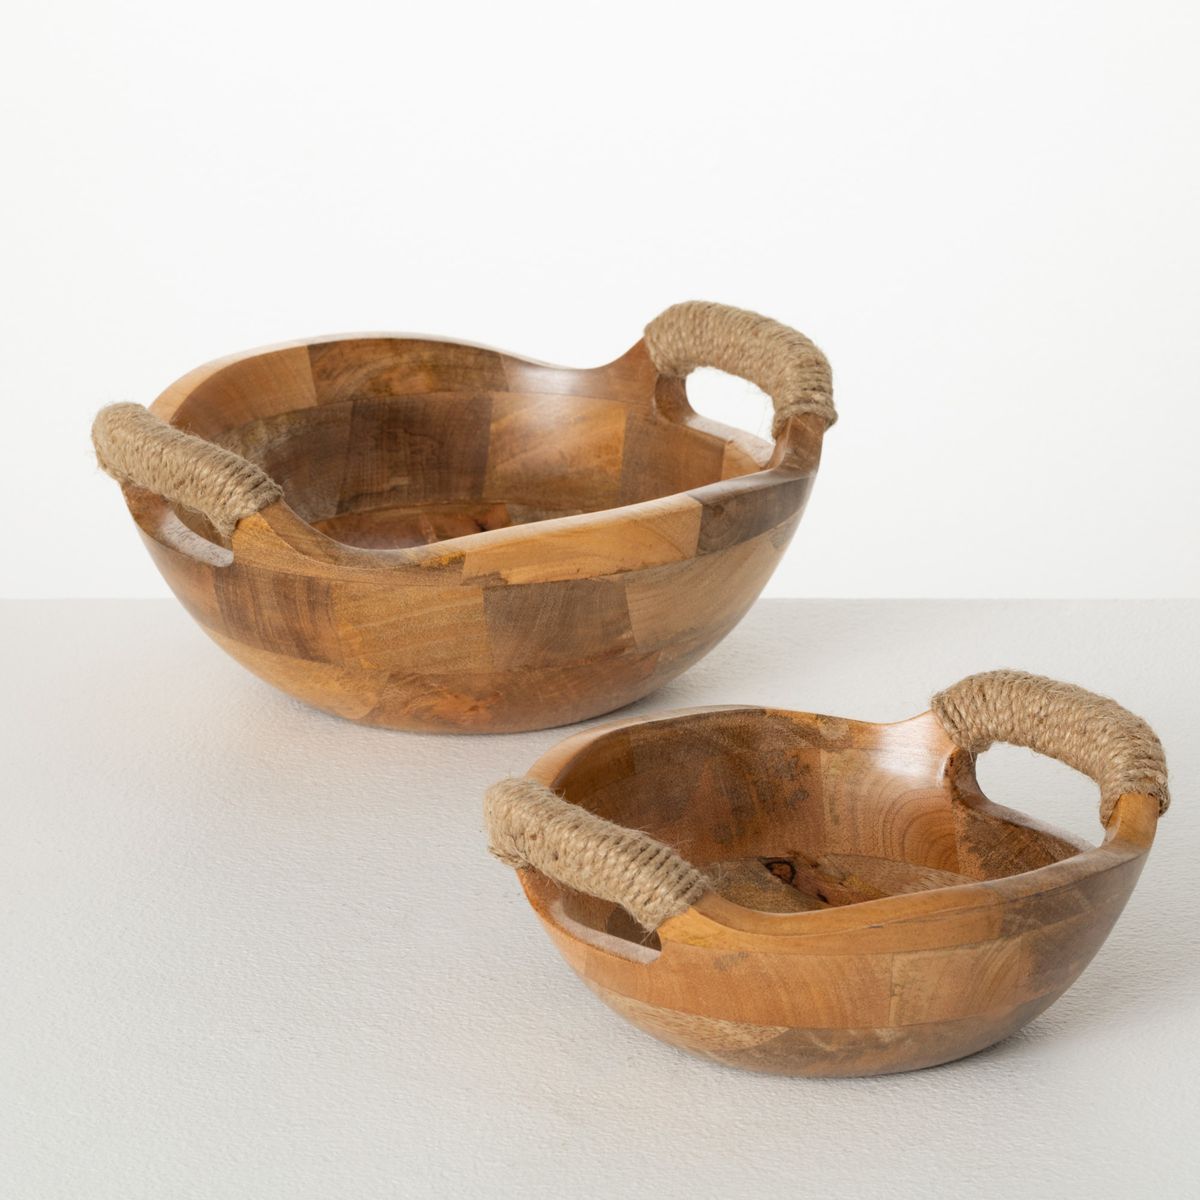 8.75"L and 10.75"L Sullivans Rustic Wood Bowl with Handles - Set of 2, Brown | Target